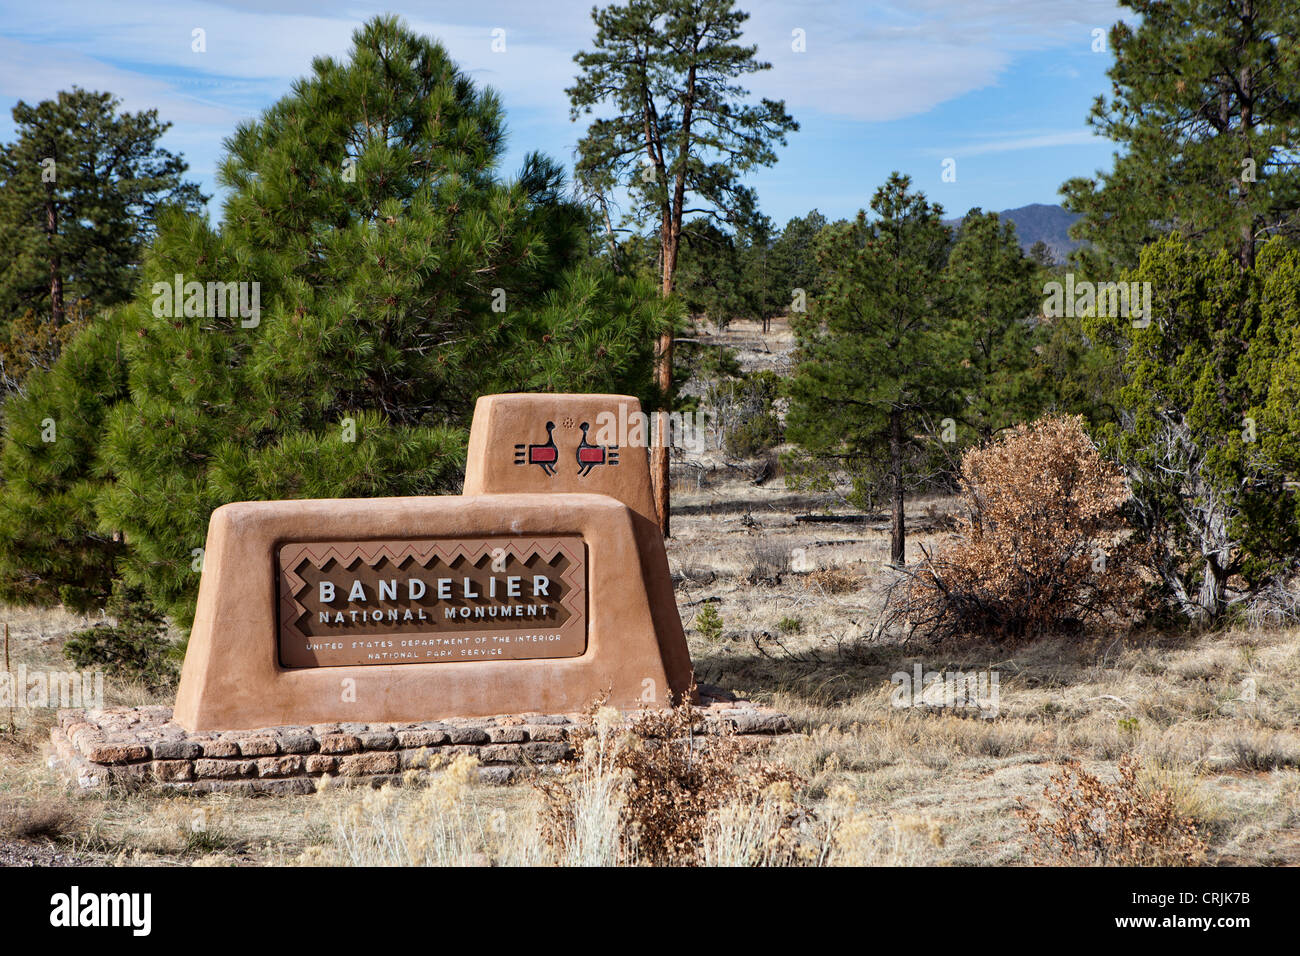 Bandelier National Monument entrance marker, New Mexico Stock Photo